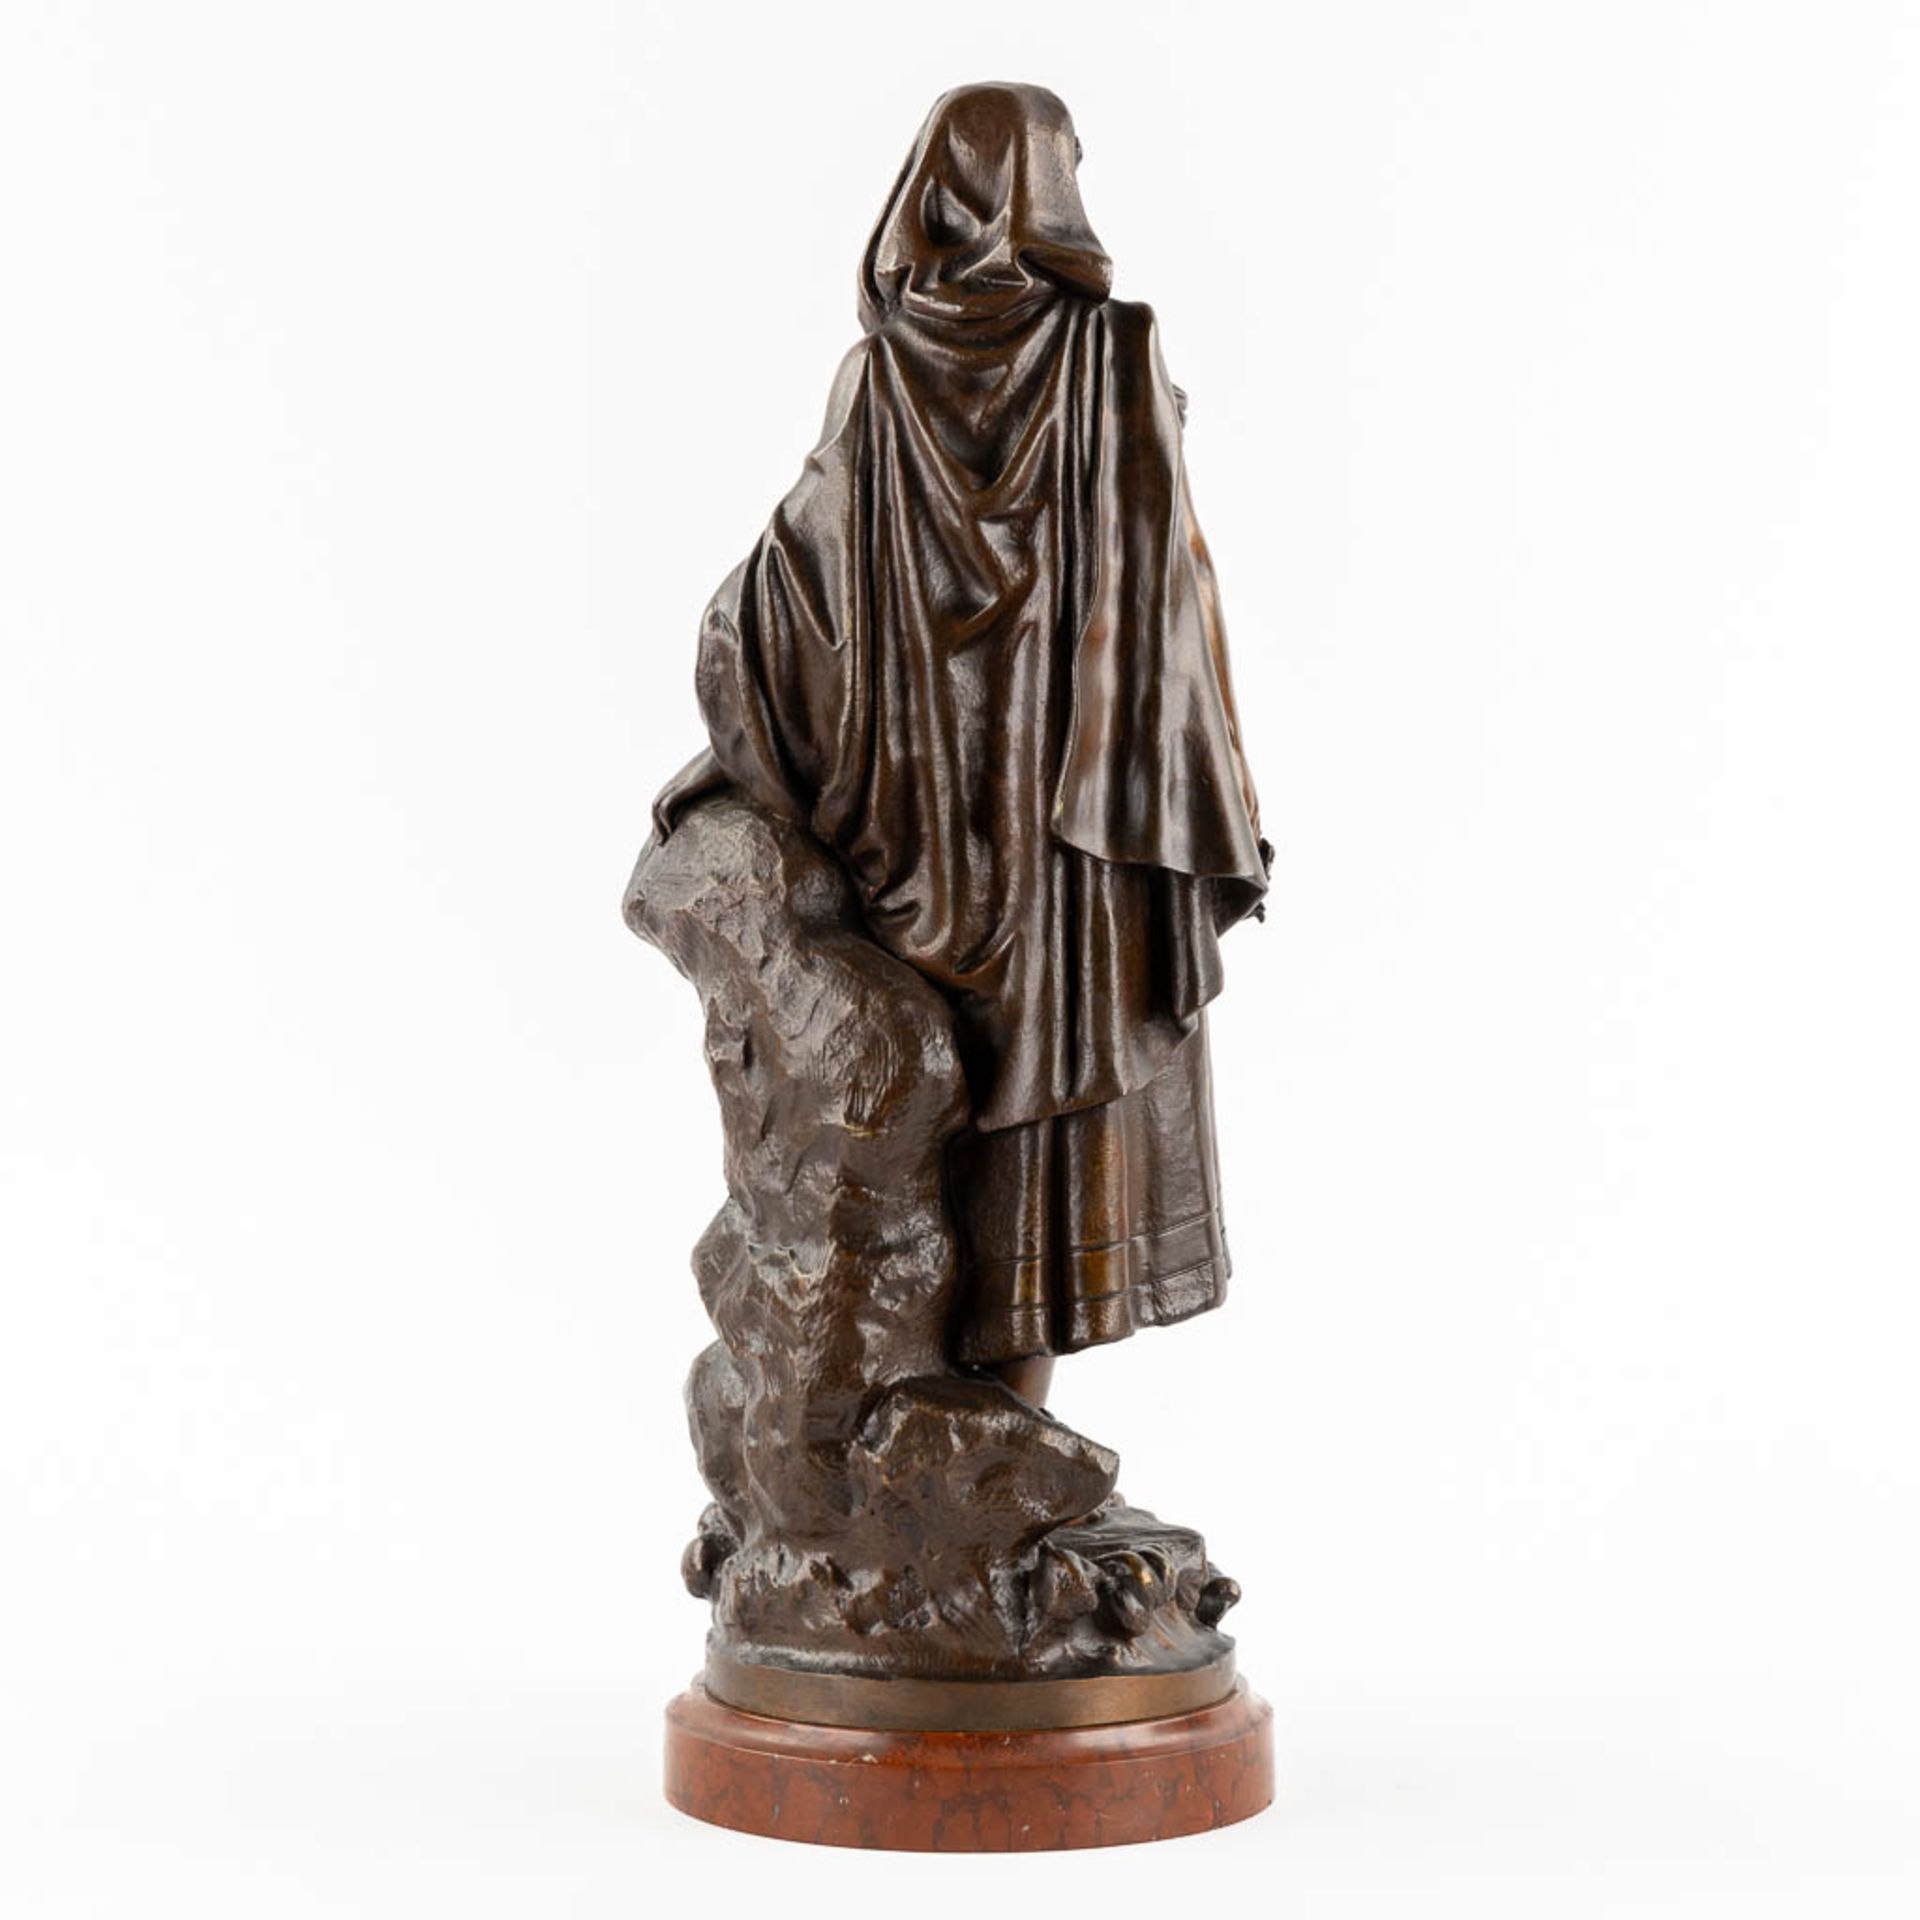 Eutrope BOURET (1833-1906) 'Lady with flowers' patinated bronze on a marble base. (L:19 x W:17 x H:4 - Image 5 of 11